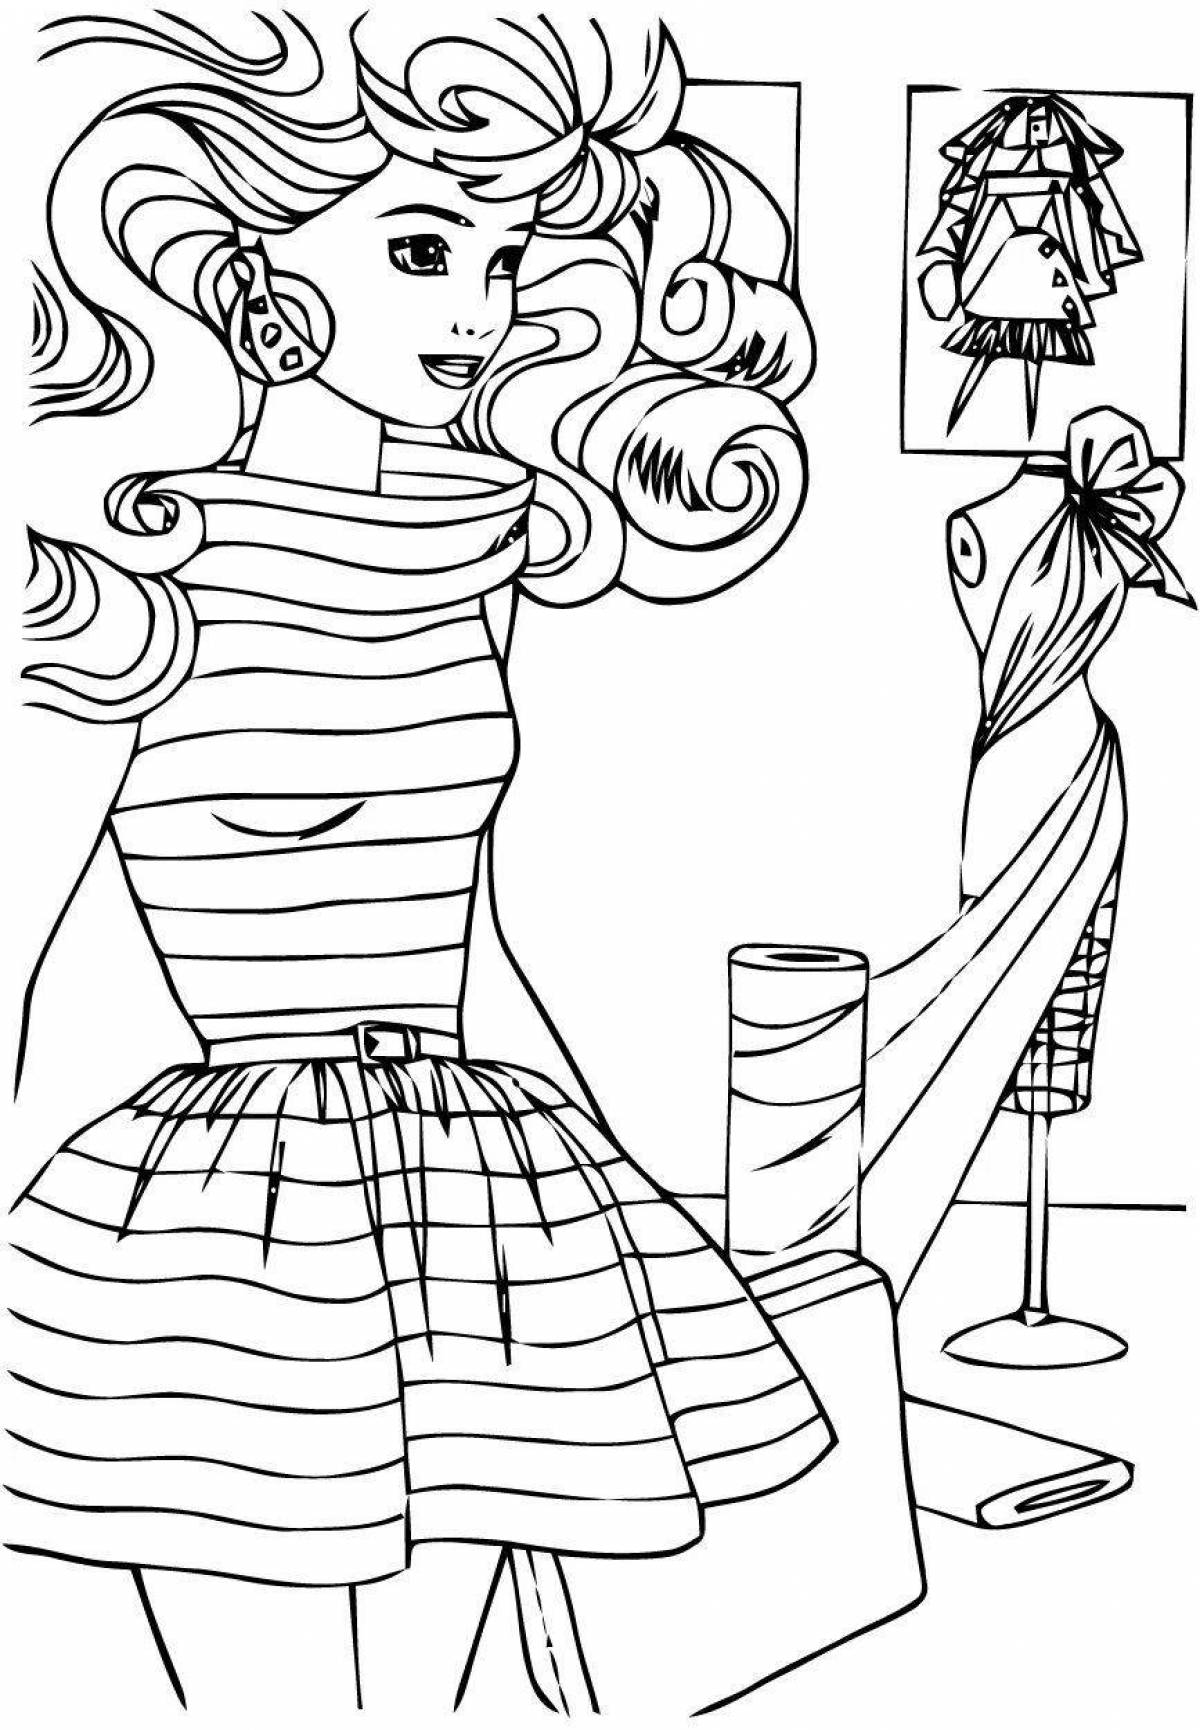 Coloring page holiday barbie 90s